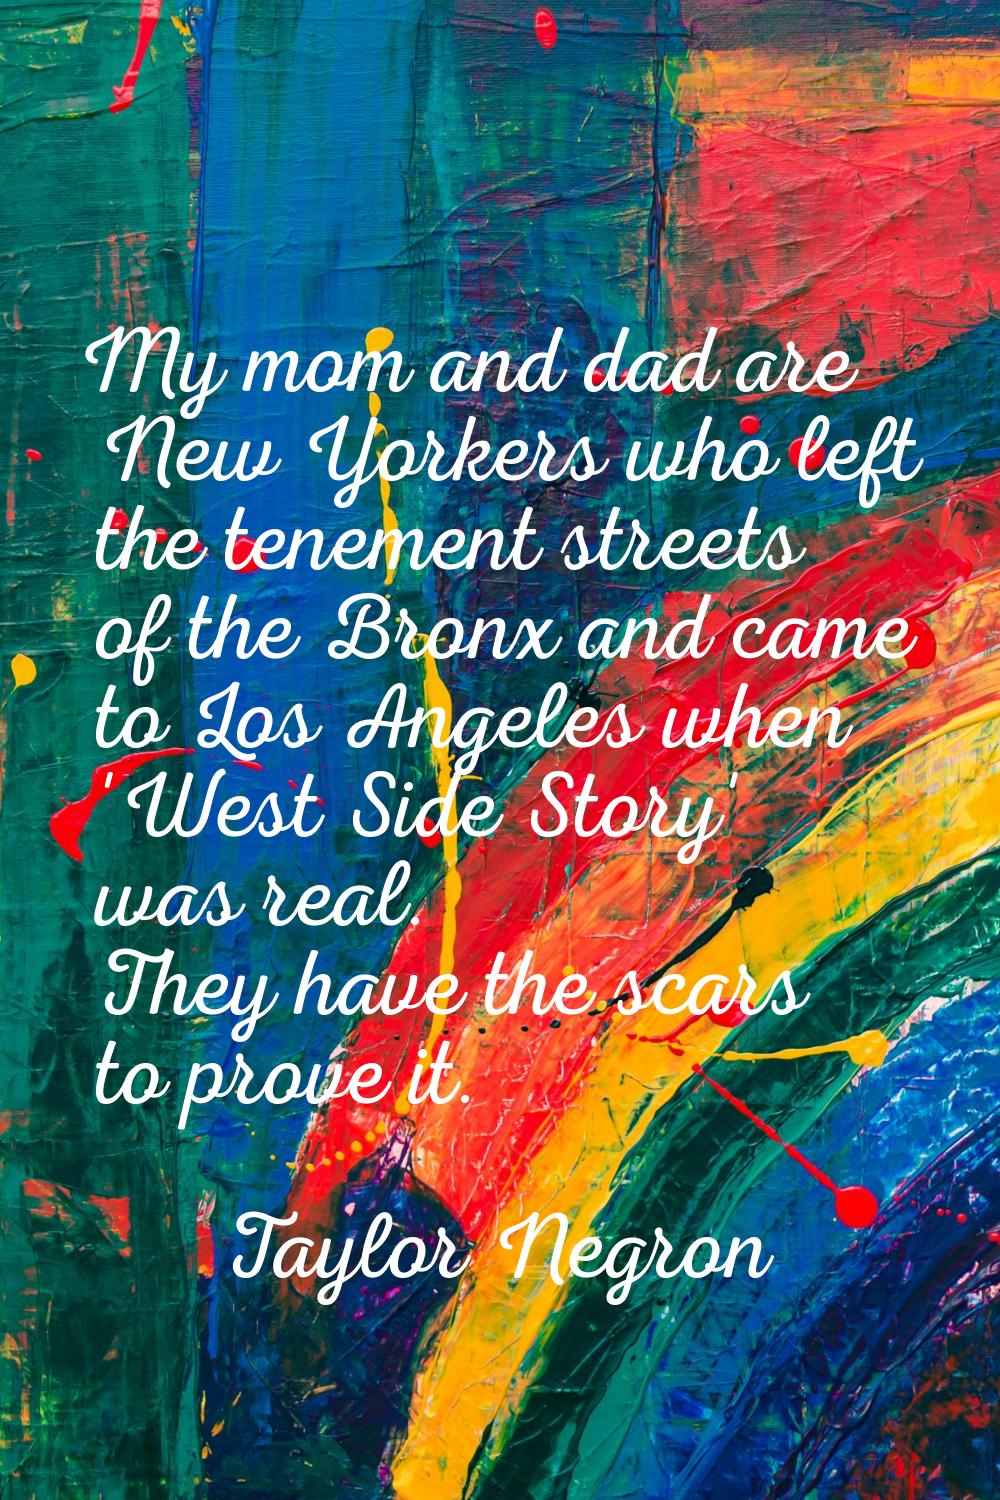 My mom and dad are New Yorkers who left the tenement streets of the Bronx and came to Los Angeles w